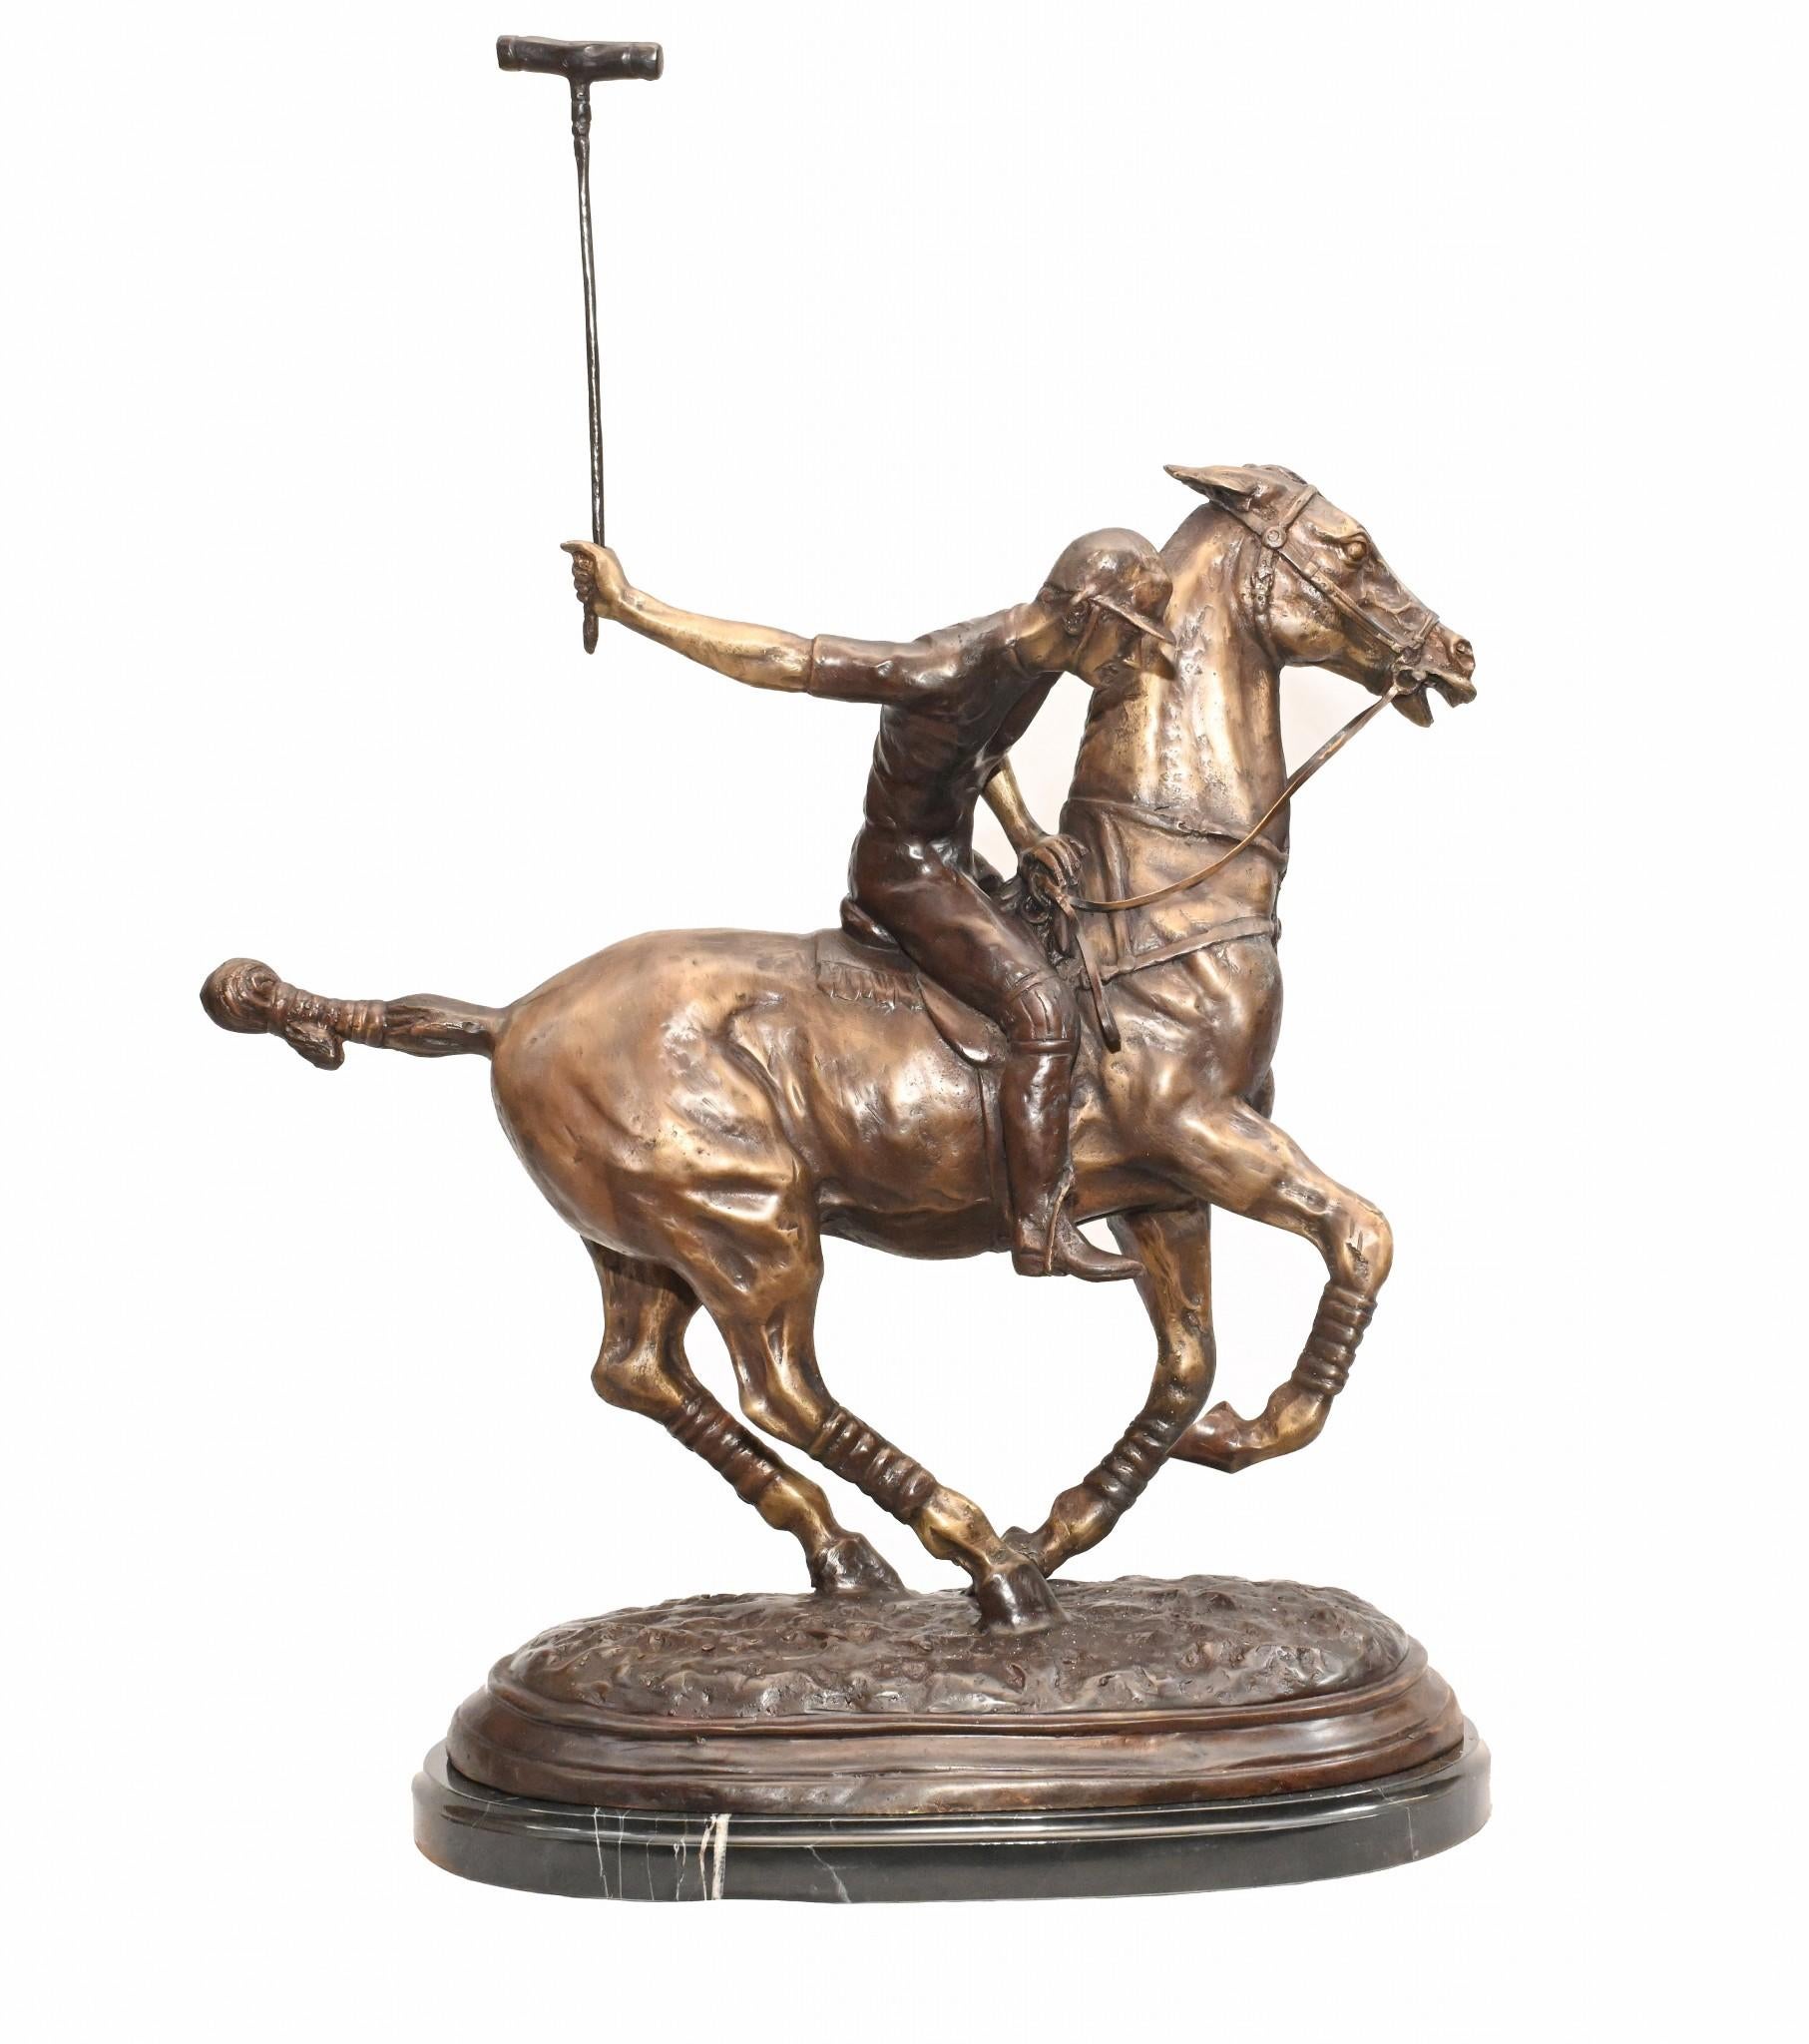 Stunning English bronze casting of a polo player in full swing
Artist has really captured the energy and athleticism of the scene with great skill
Patina to the bronze is superb with various brown hues
Piece sits on a black marble base which is